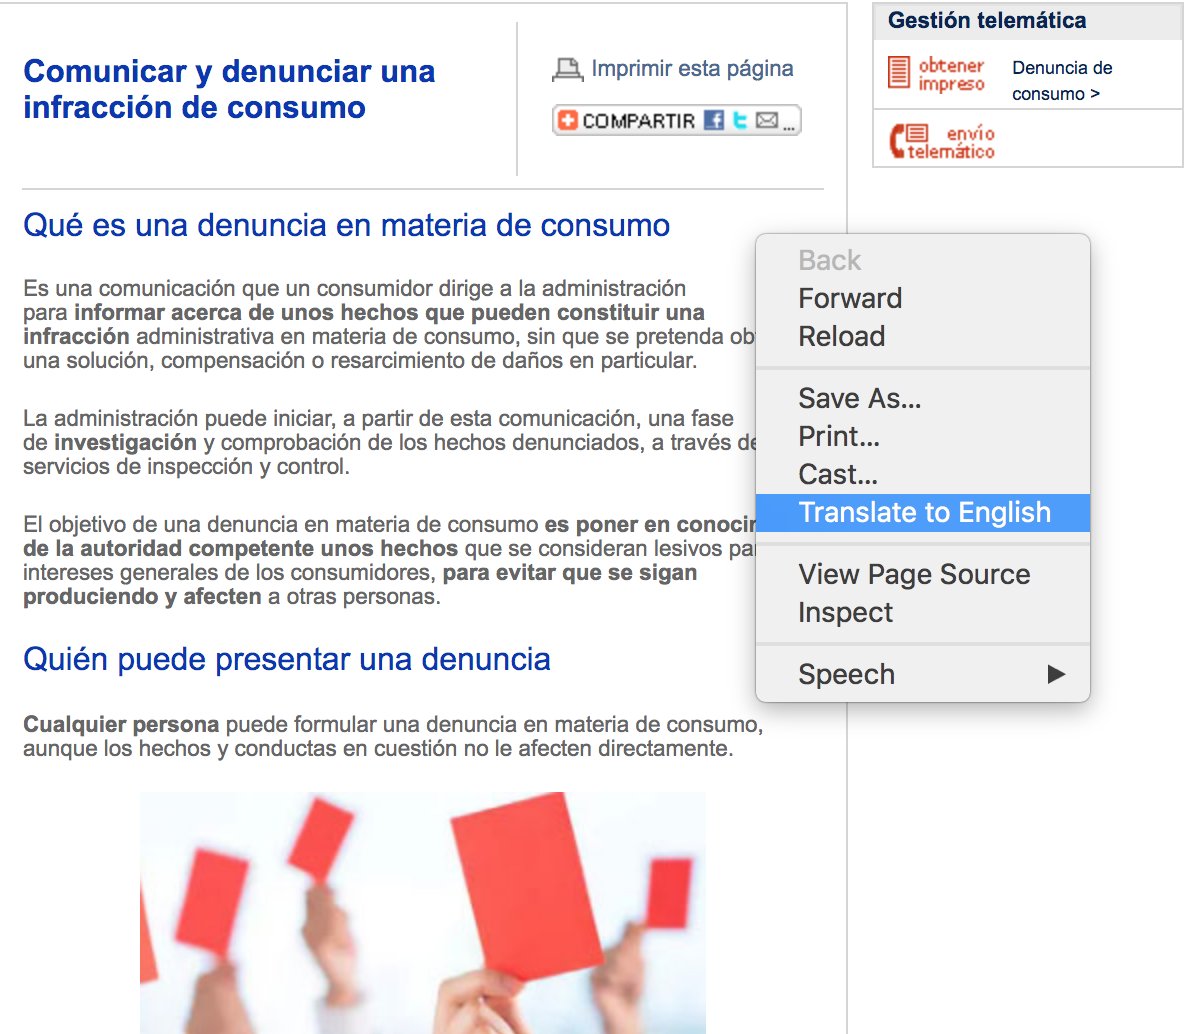 All the information in Spanish is here, they explain how to report a consumer infringement. "Comunicar y denunciar una infracción de consumo":  https://bit.ly/2XjSzHI  You can right click -> "translate to english". If you want to read it.